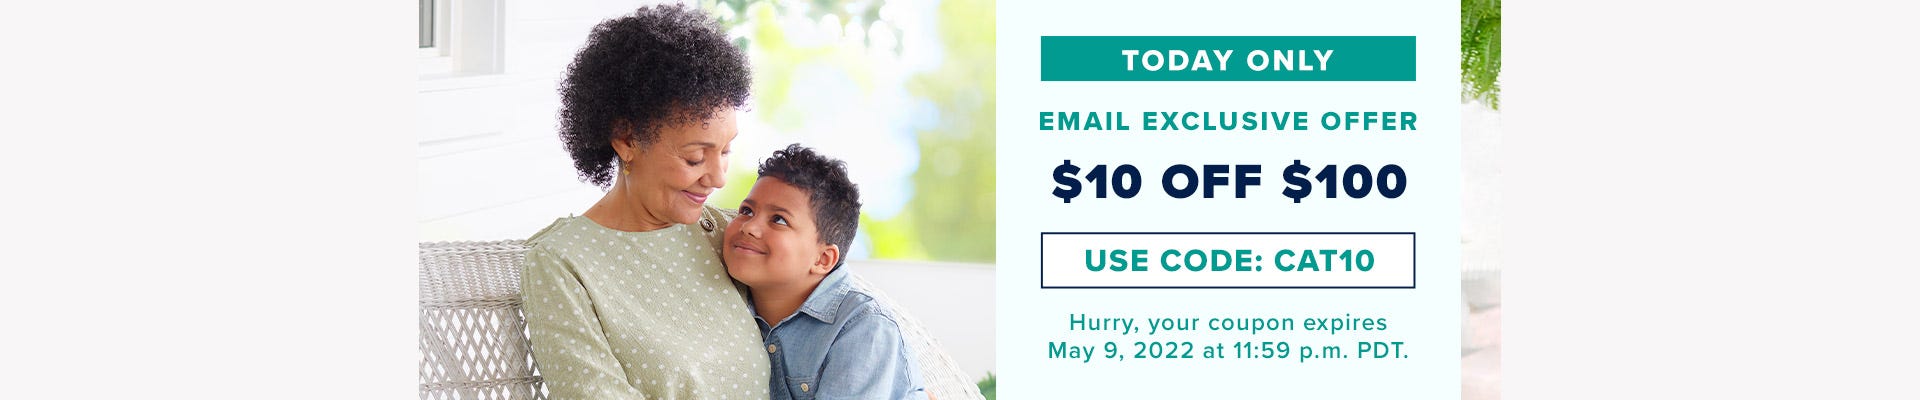 Today Only - Email Exclusive Offer - $10 Off $100 - Use Code CAT10 - Hurry, your coupon expires May 9, 2022 at 11:59 p.m. PDT